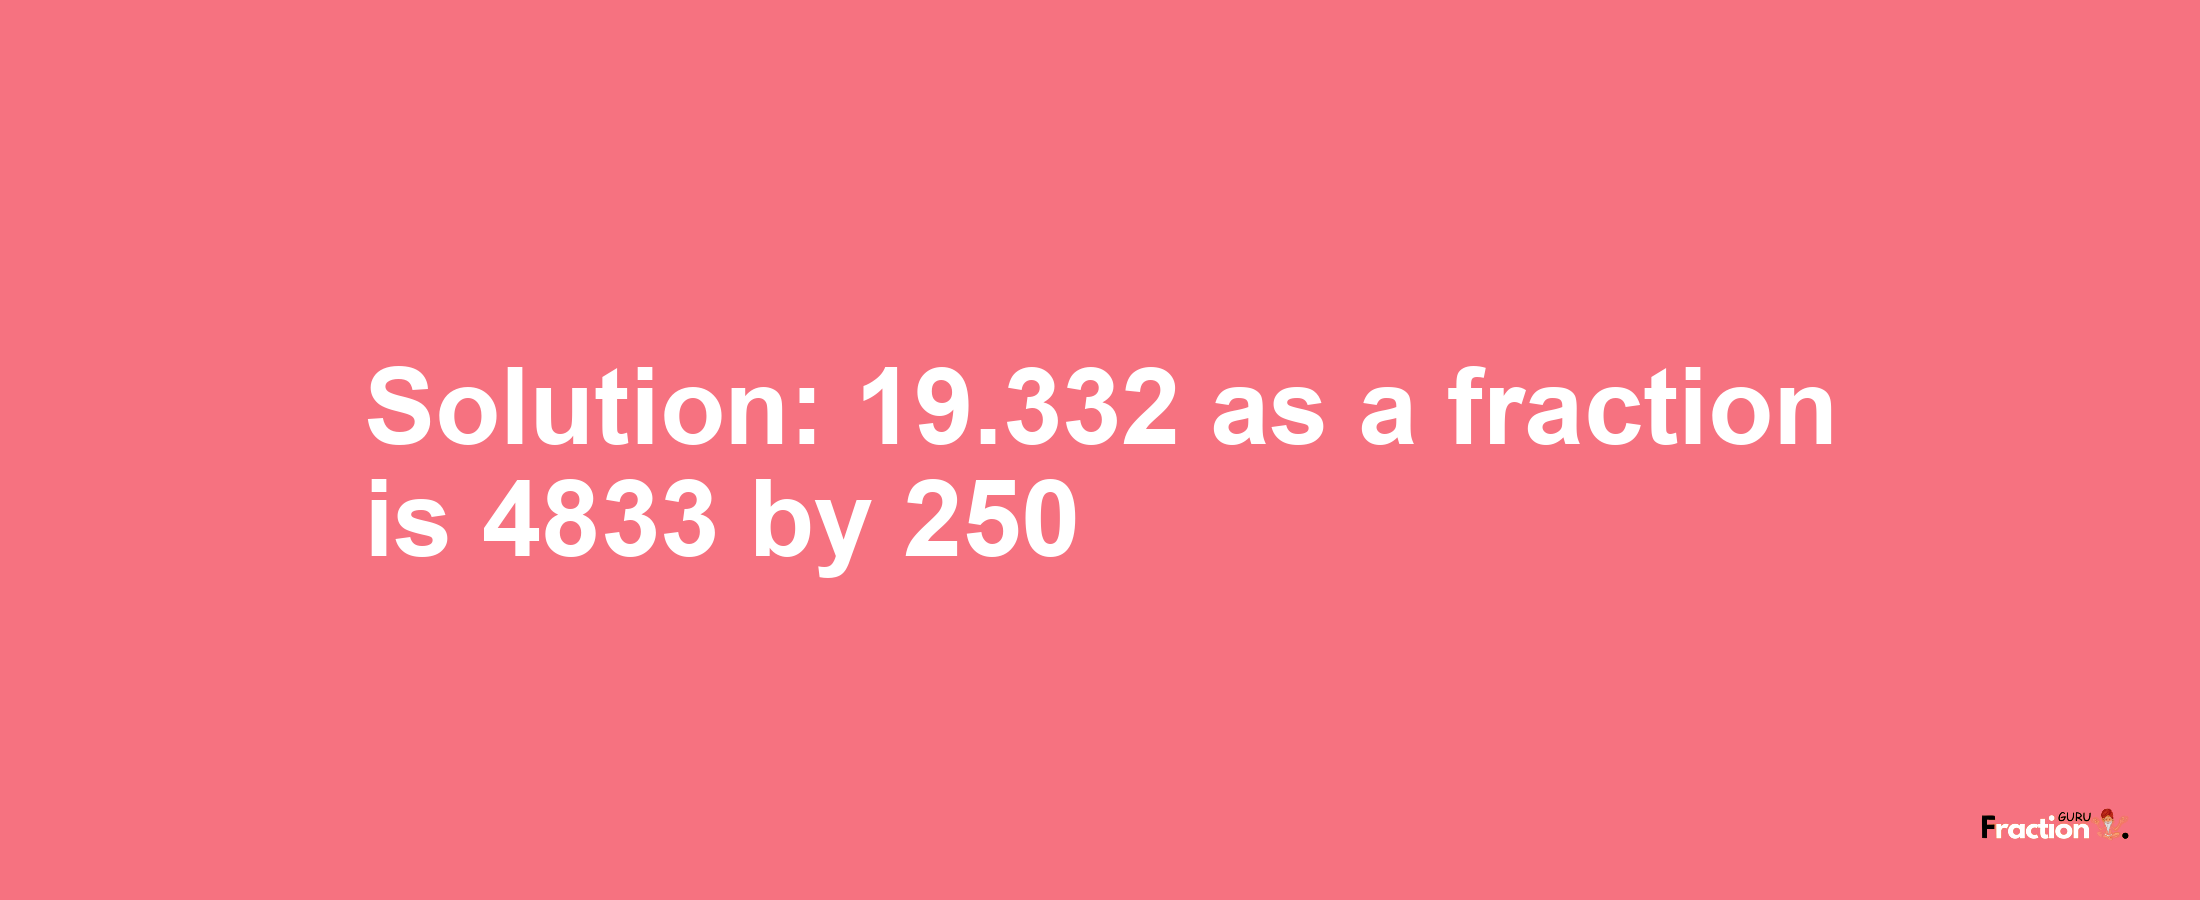 Solution:19.332 as a fraction is 4833/250